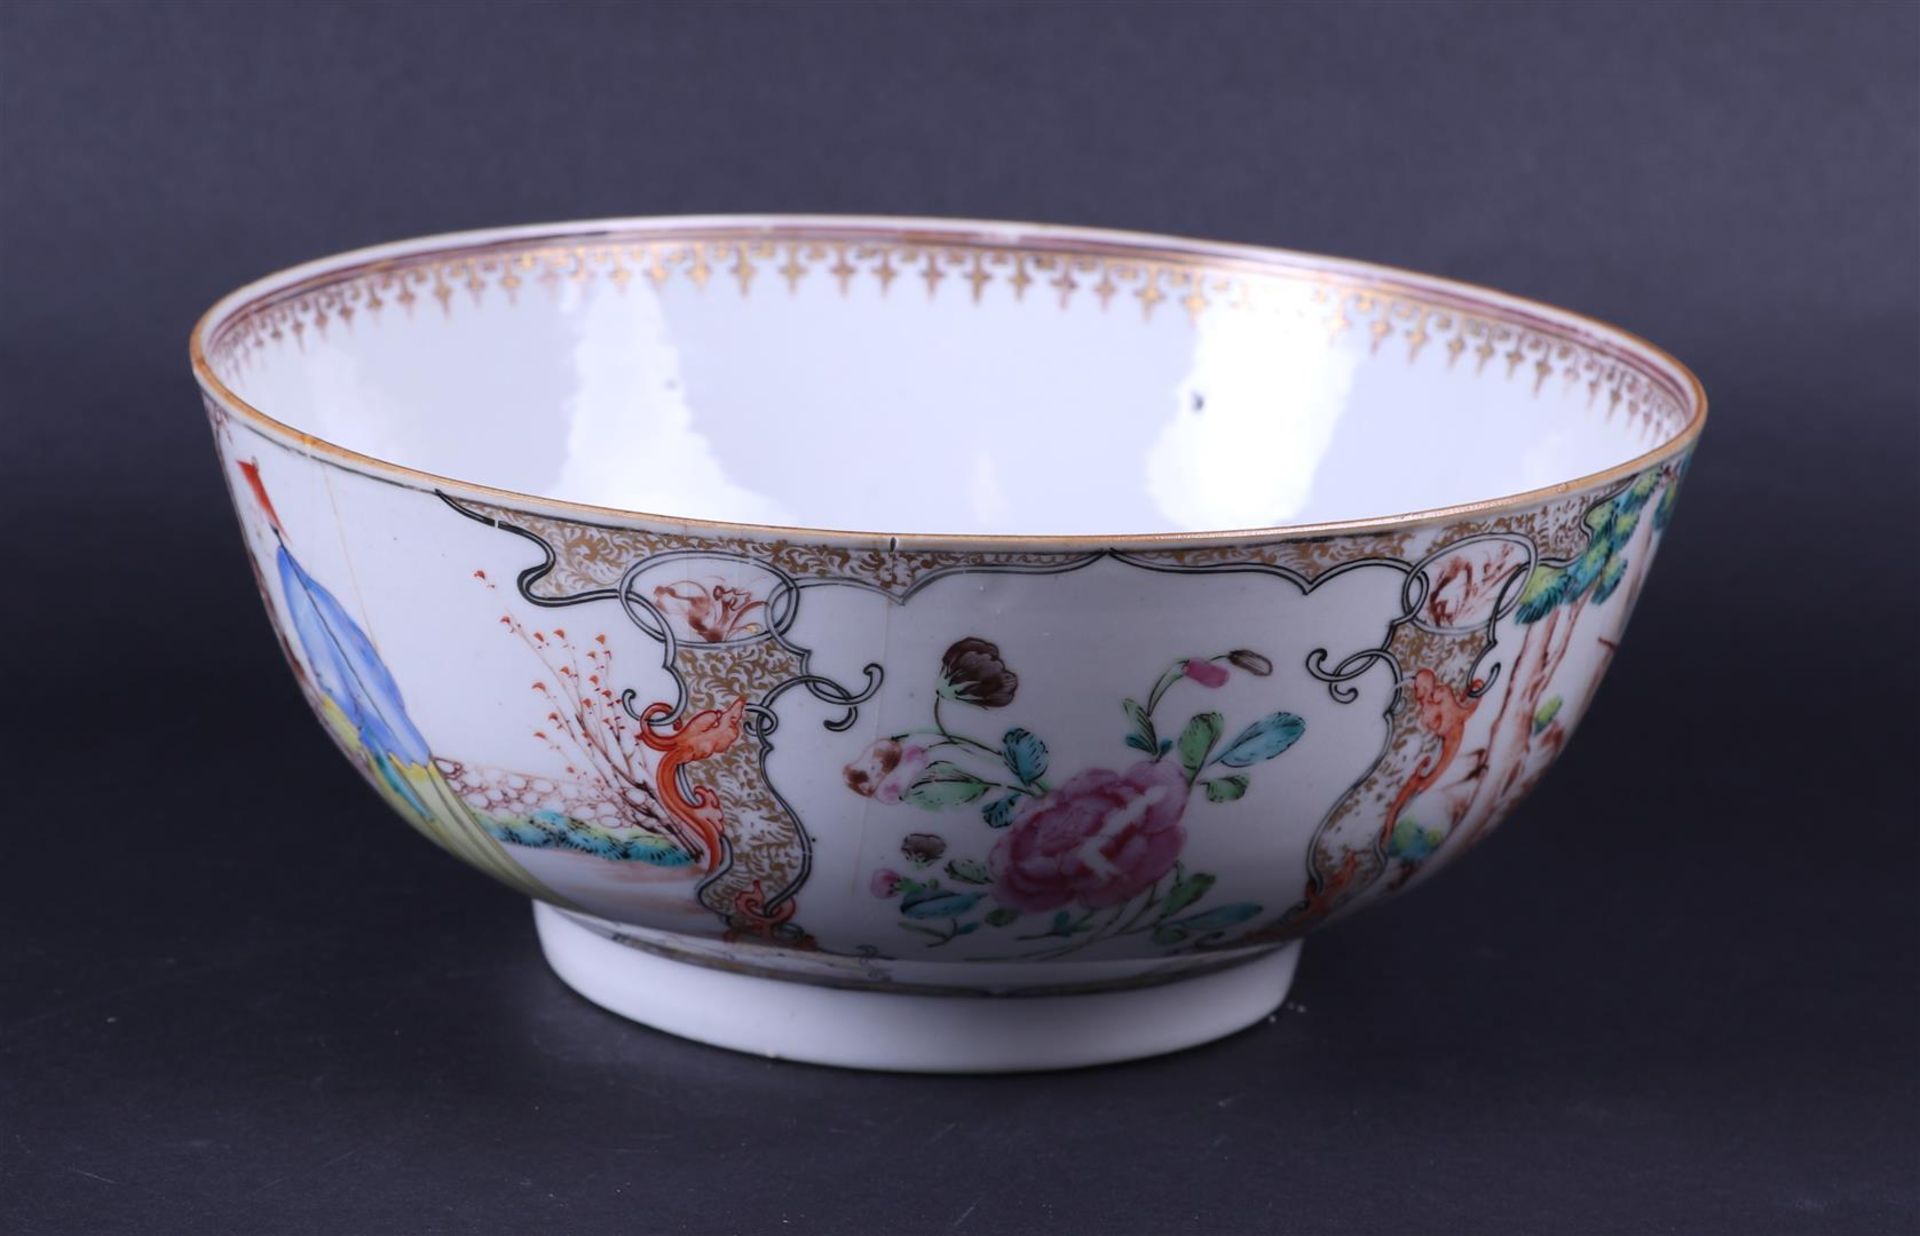 A large porcelain Chine de comande bowl decorated with various figures. China, 18th century. - Image 4 of 6